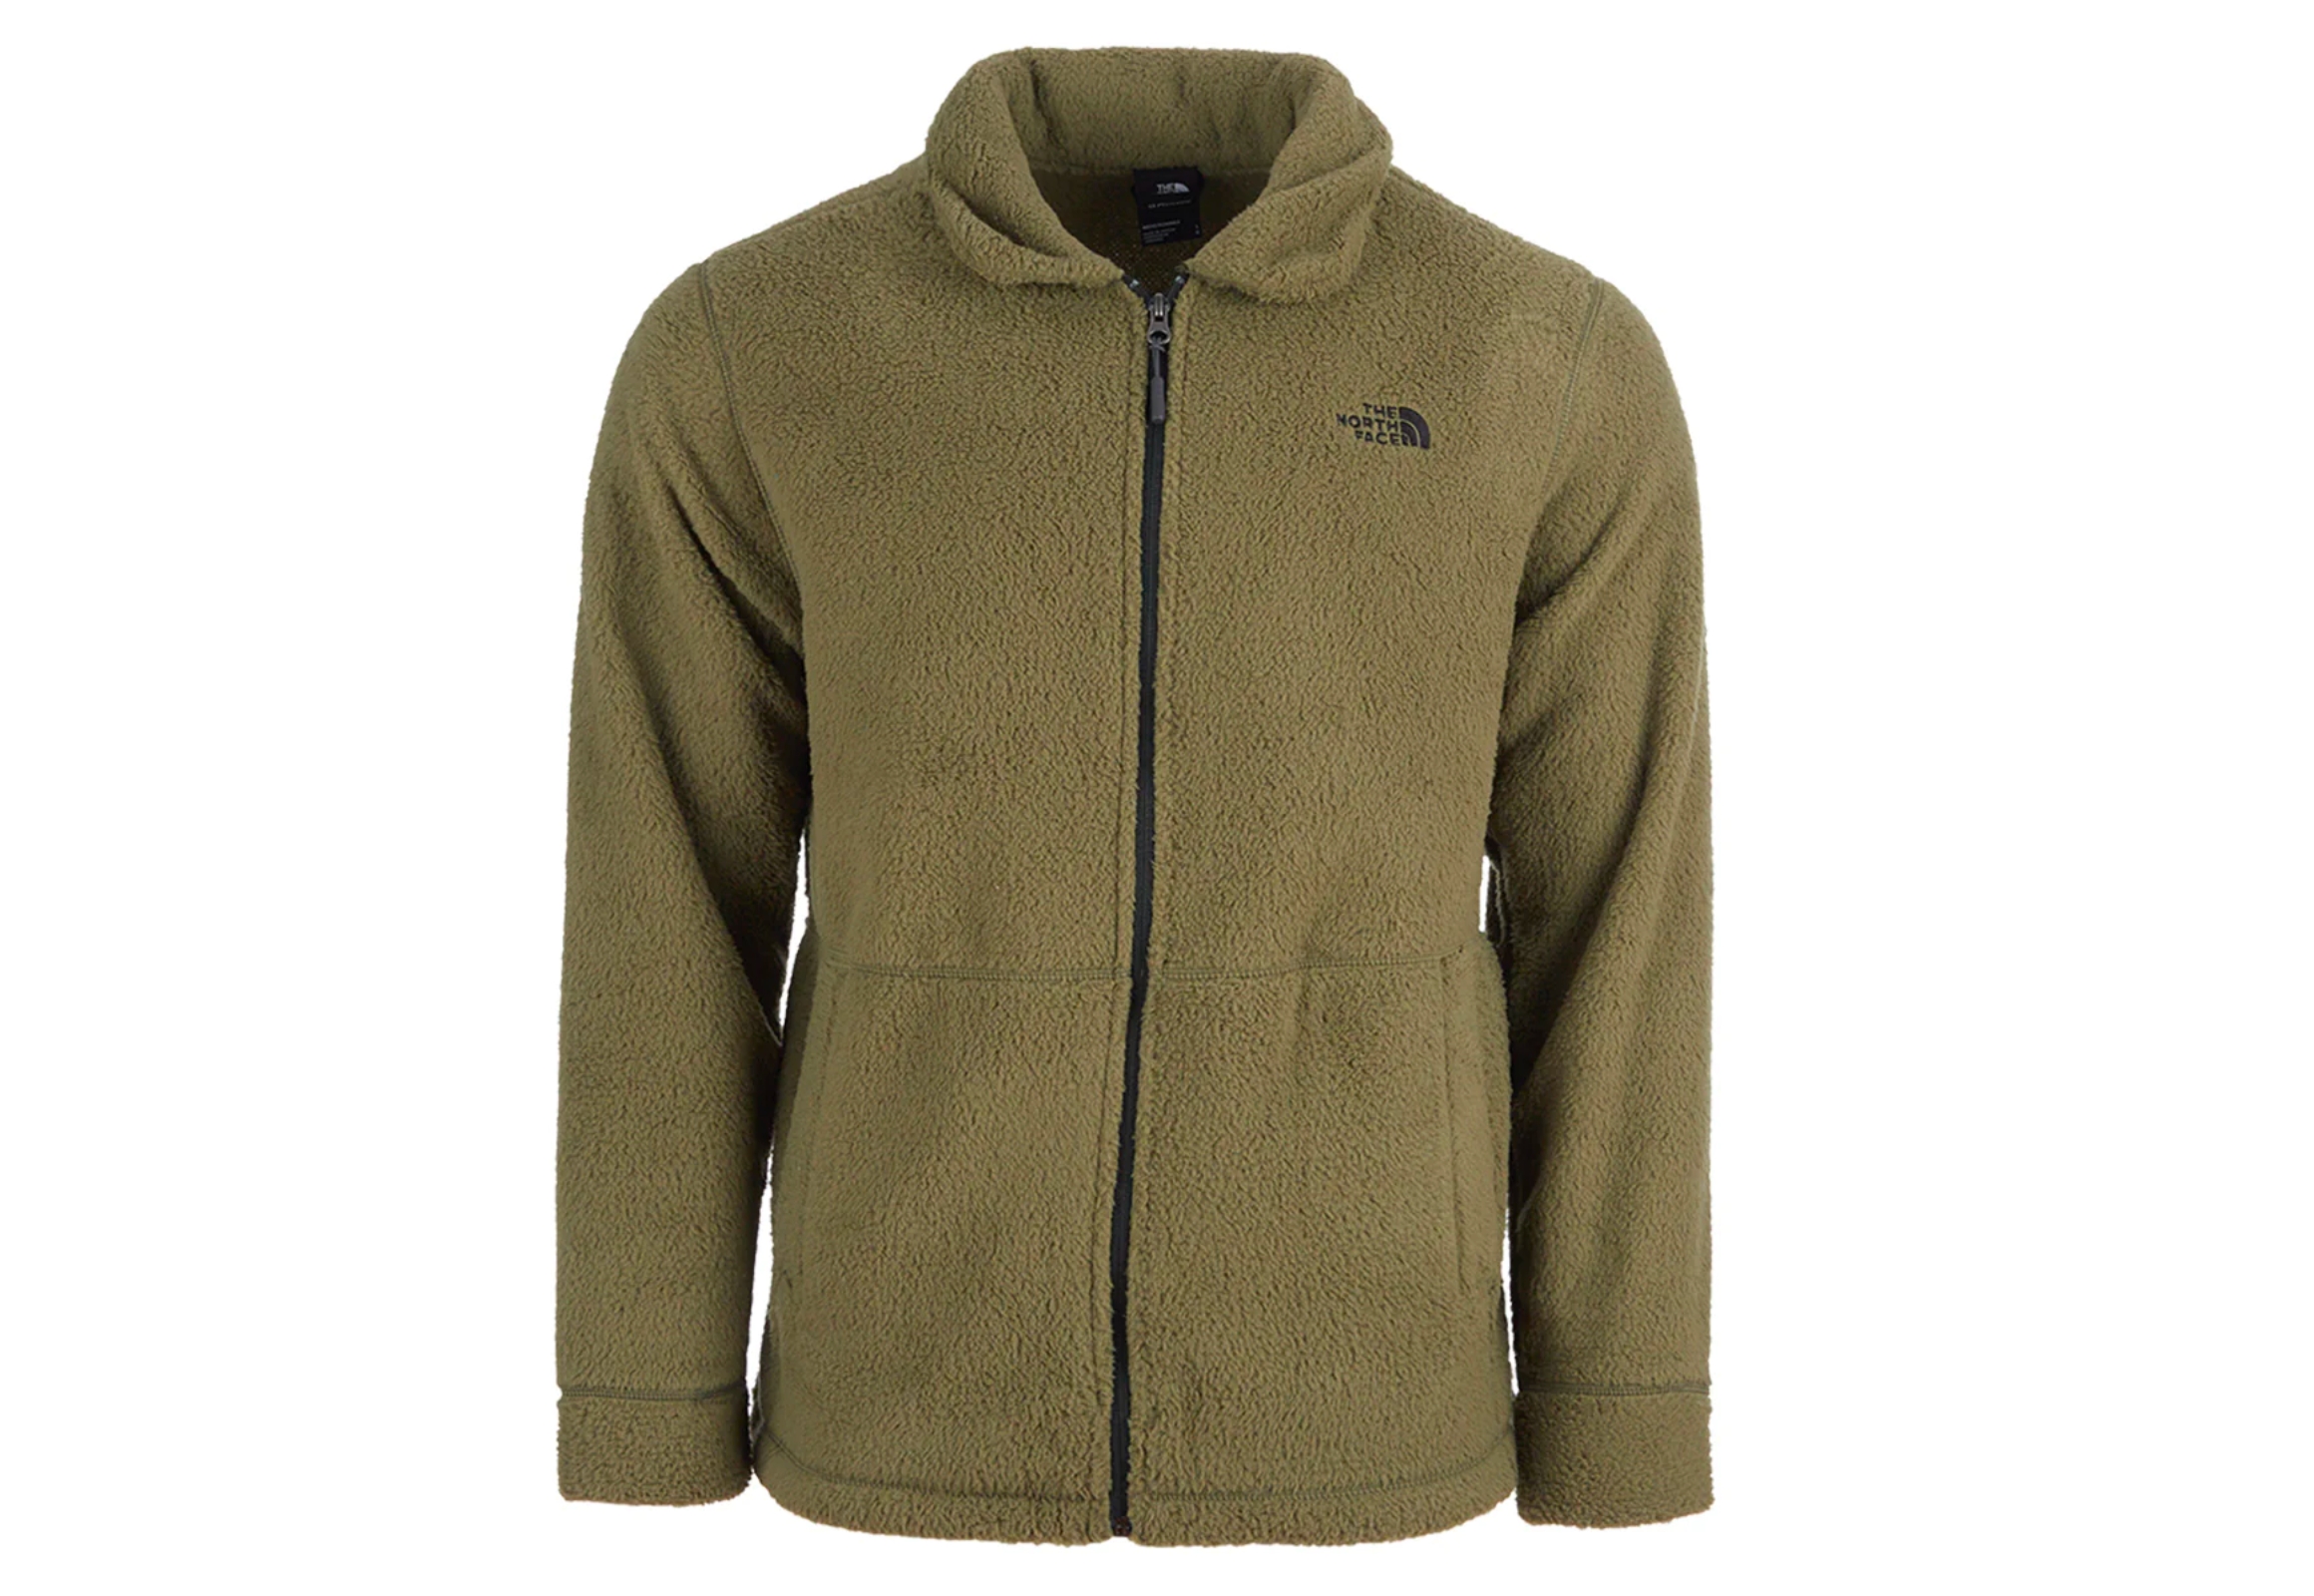 The North Face Men's Sherpa Zip Up Jacket